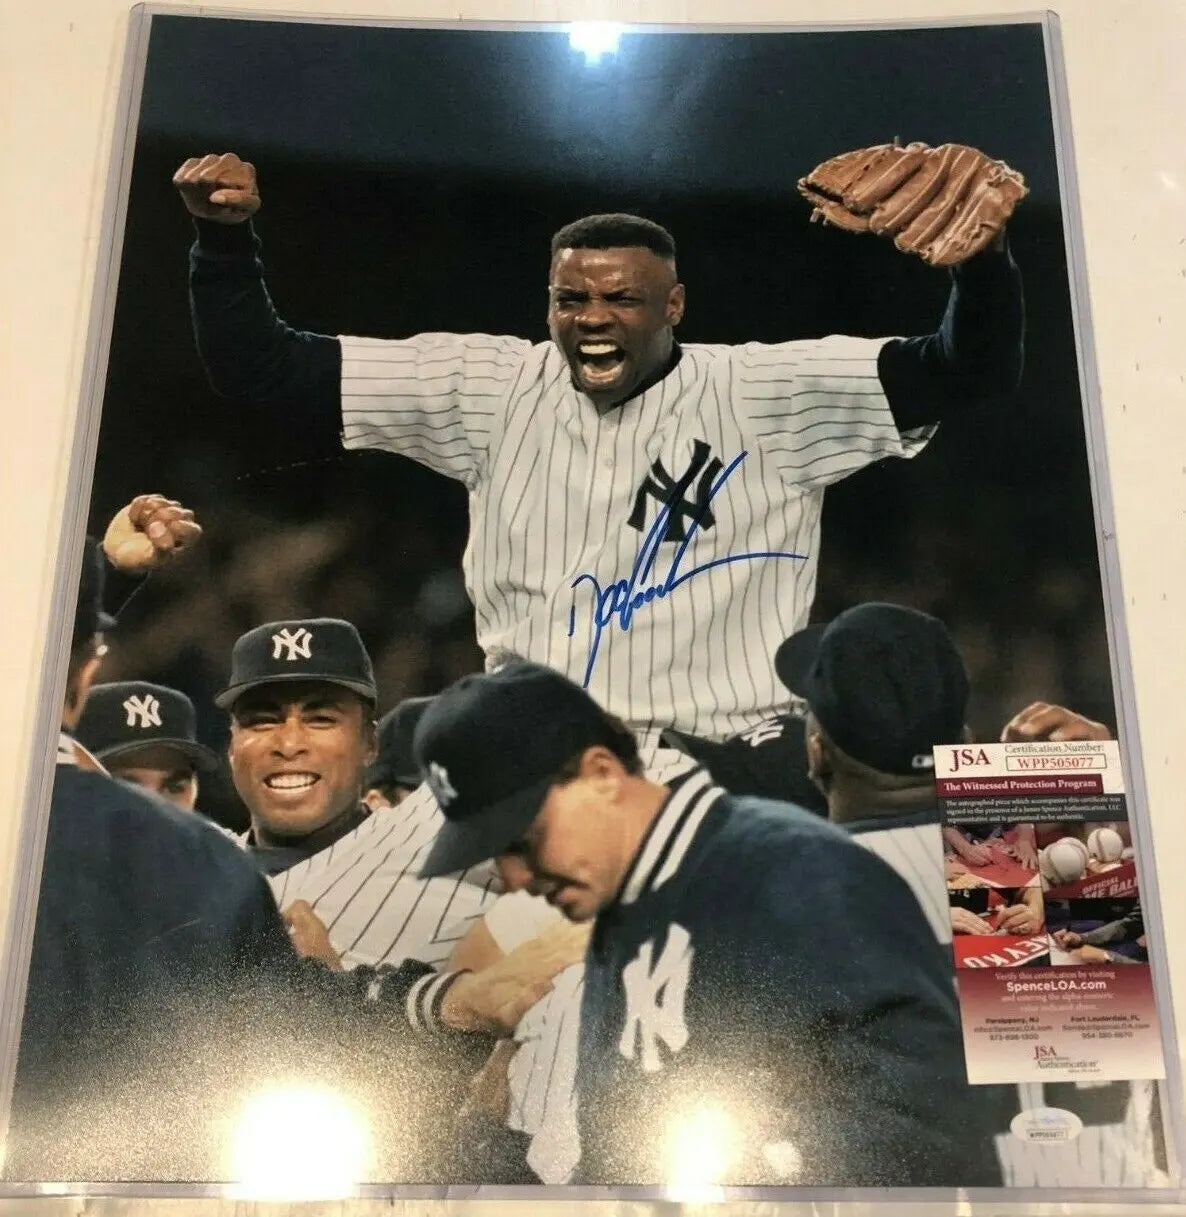 Dwight Gooden Autographed Signed N.Y. Yankees 16X20 Photo Jsa Coa